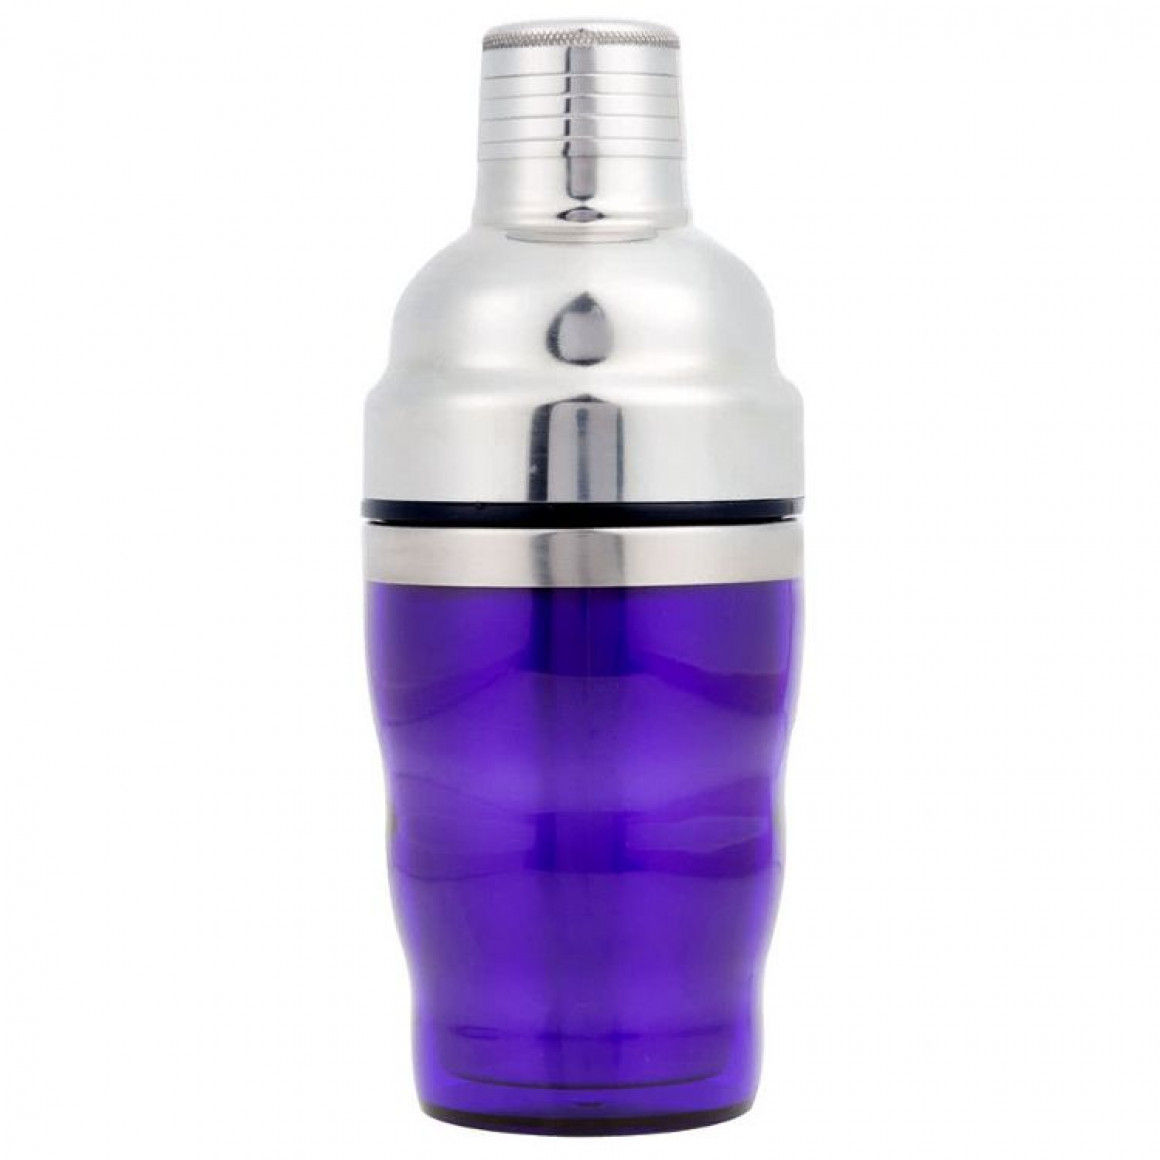 COCKTAIL SHAKER, STAINLESS STEEL, ACRYLIC, PURPLE, 10 OZ.